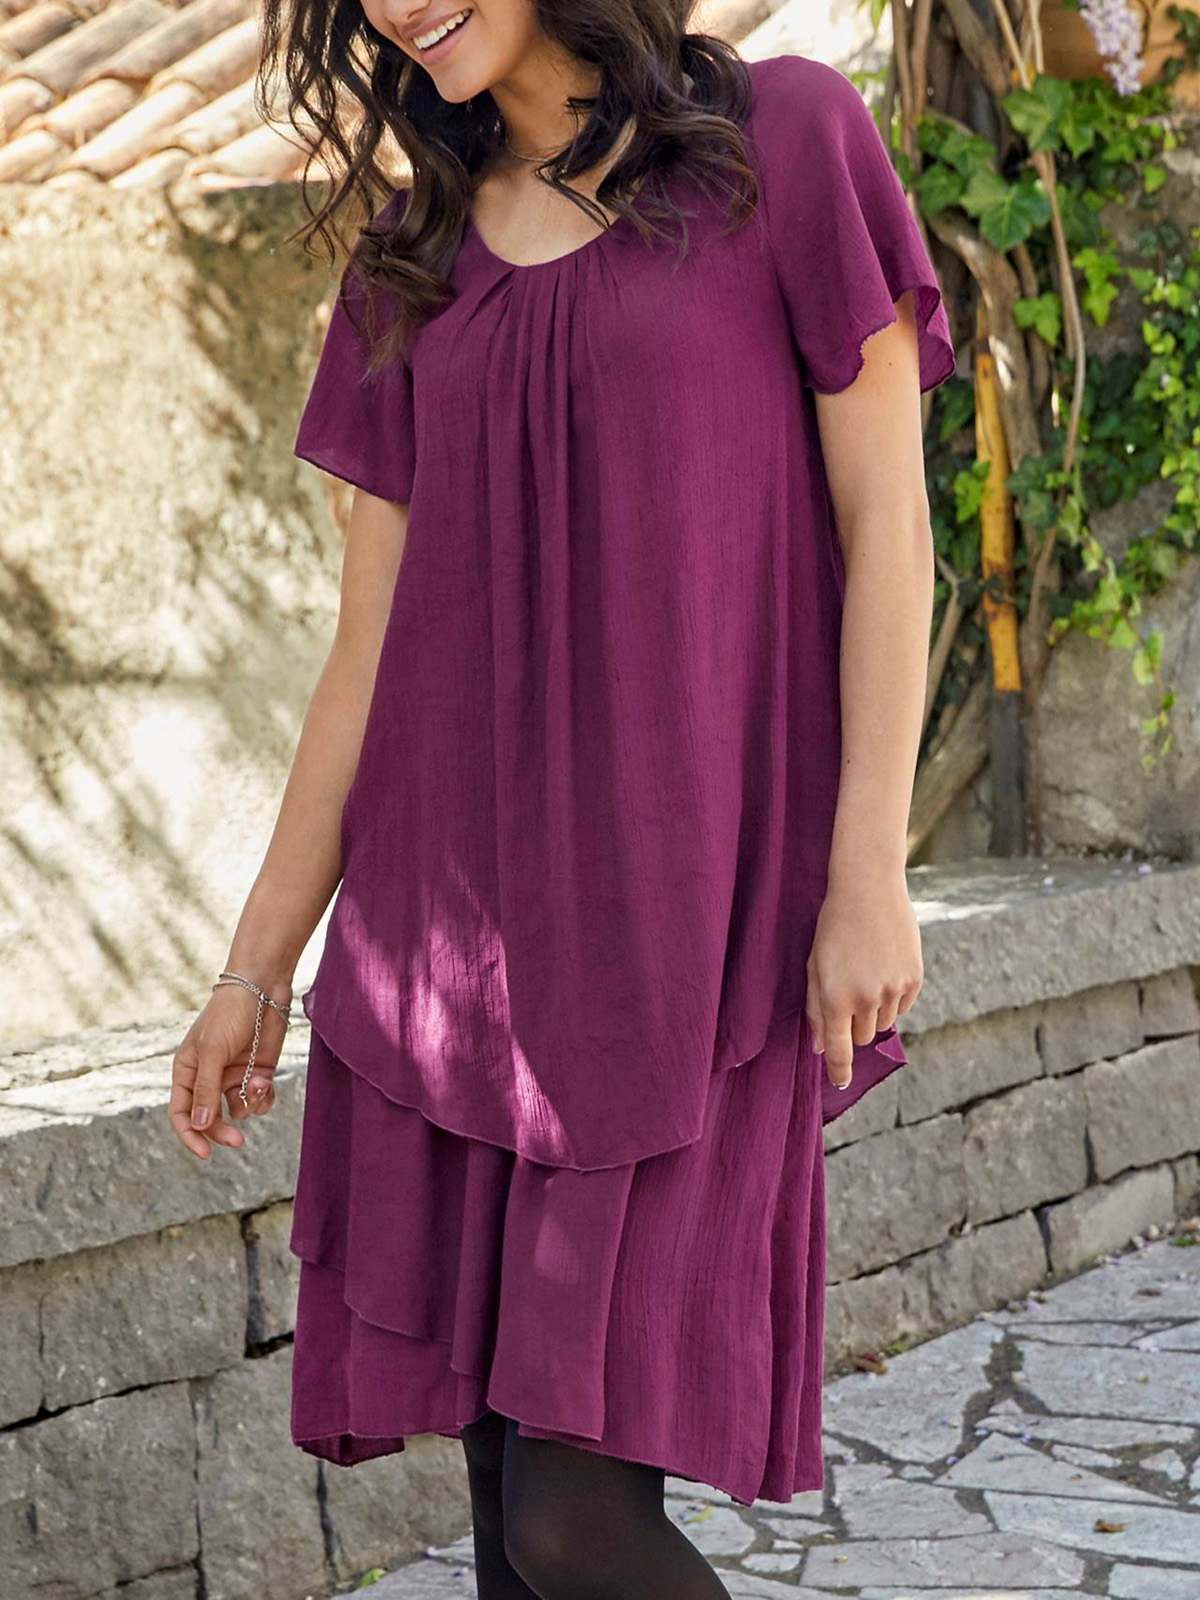 Wholesale Plus Size clothing, outsize ladies Cellbes - Cellbes PLUM Short Sleeve Layered Dress - Size 8/10 to 16/18 (EU 34/36 t